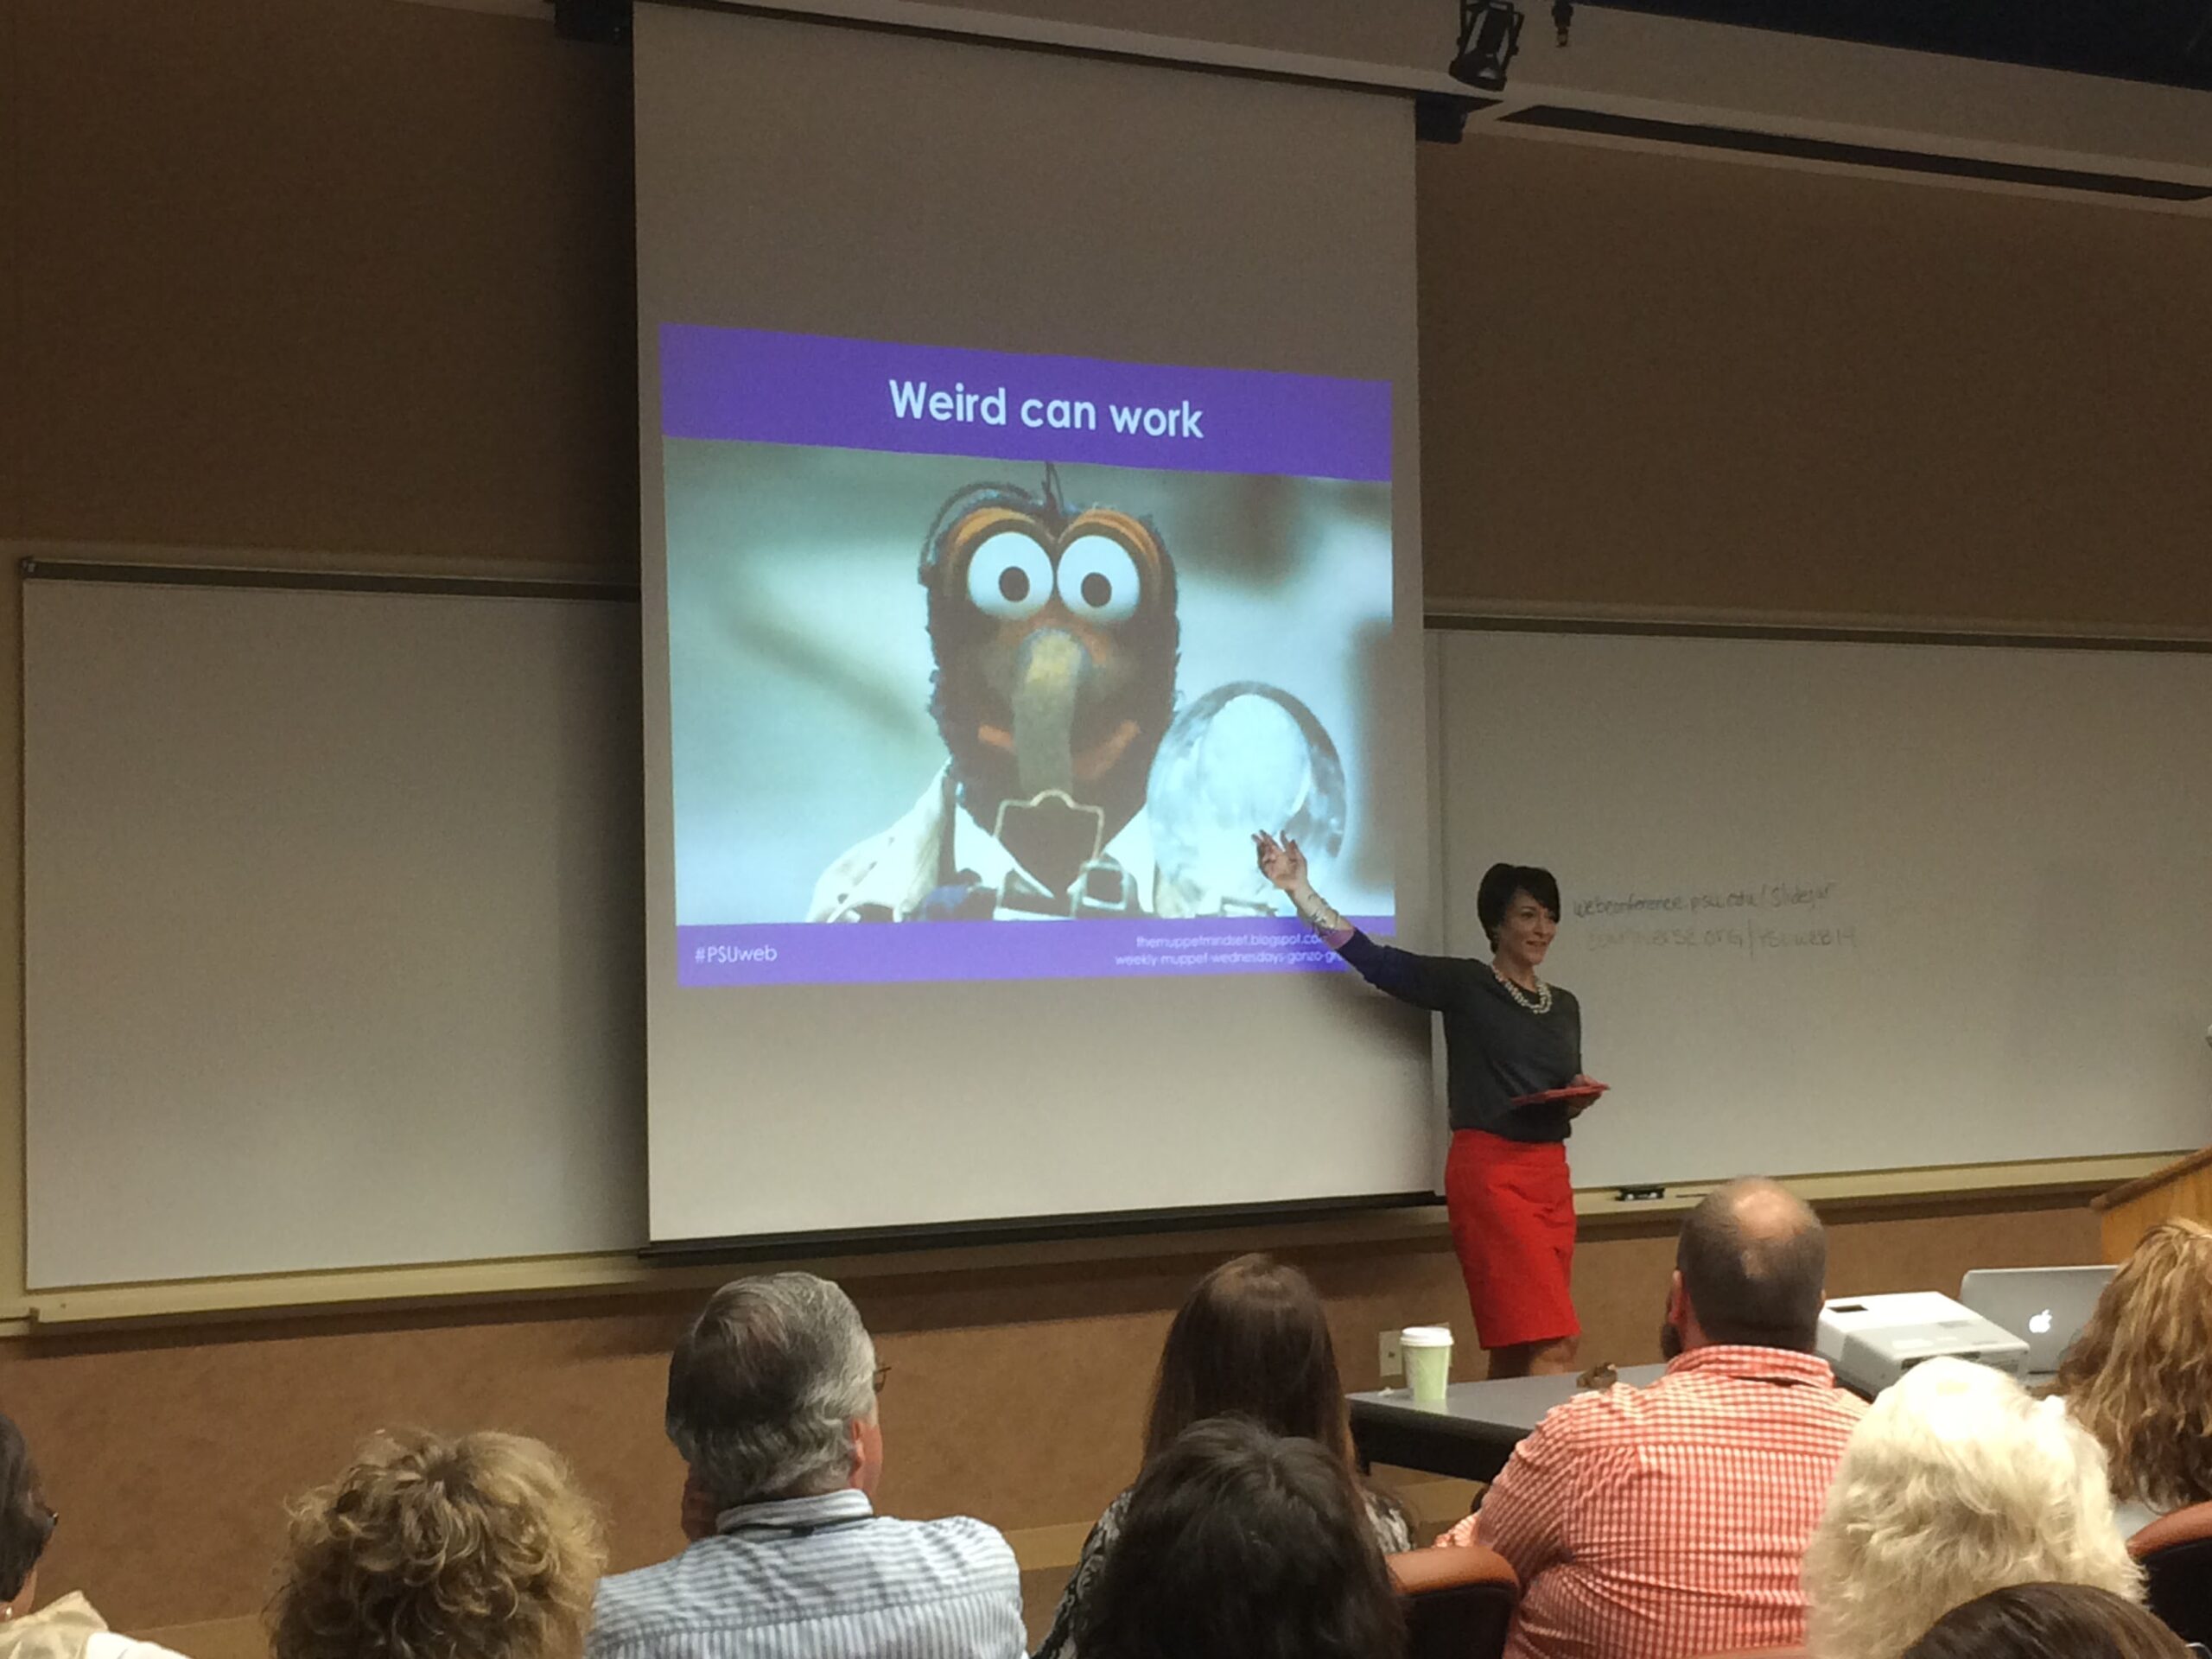 Tonya Oaks Smith at a HighEdWeb presentation about social media and muppets pointing to a slide featuring Gonzo that says "Weird can work"